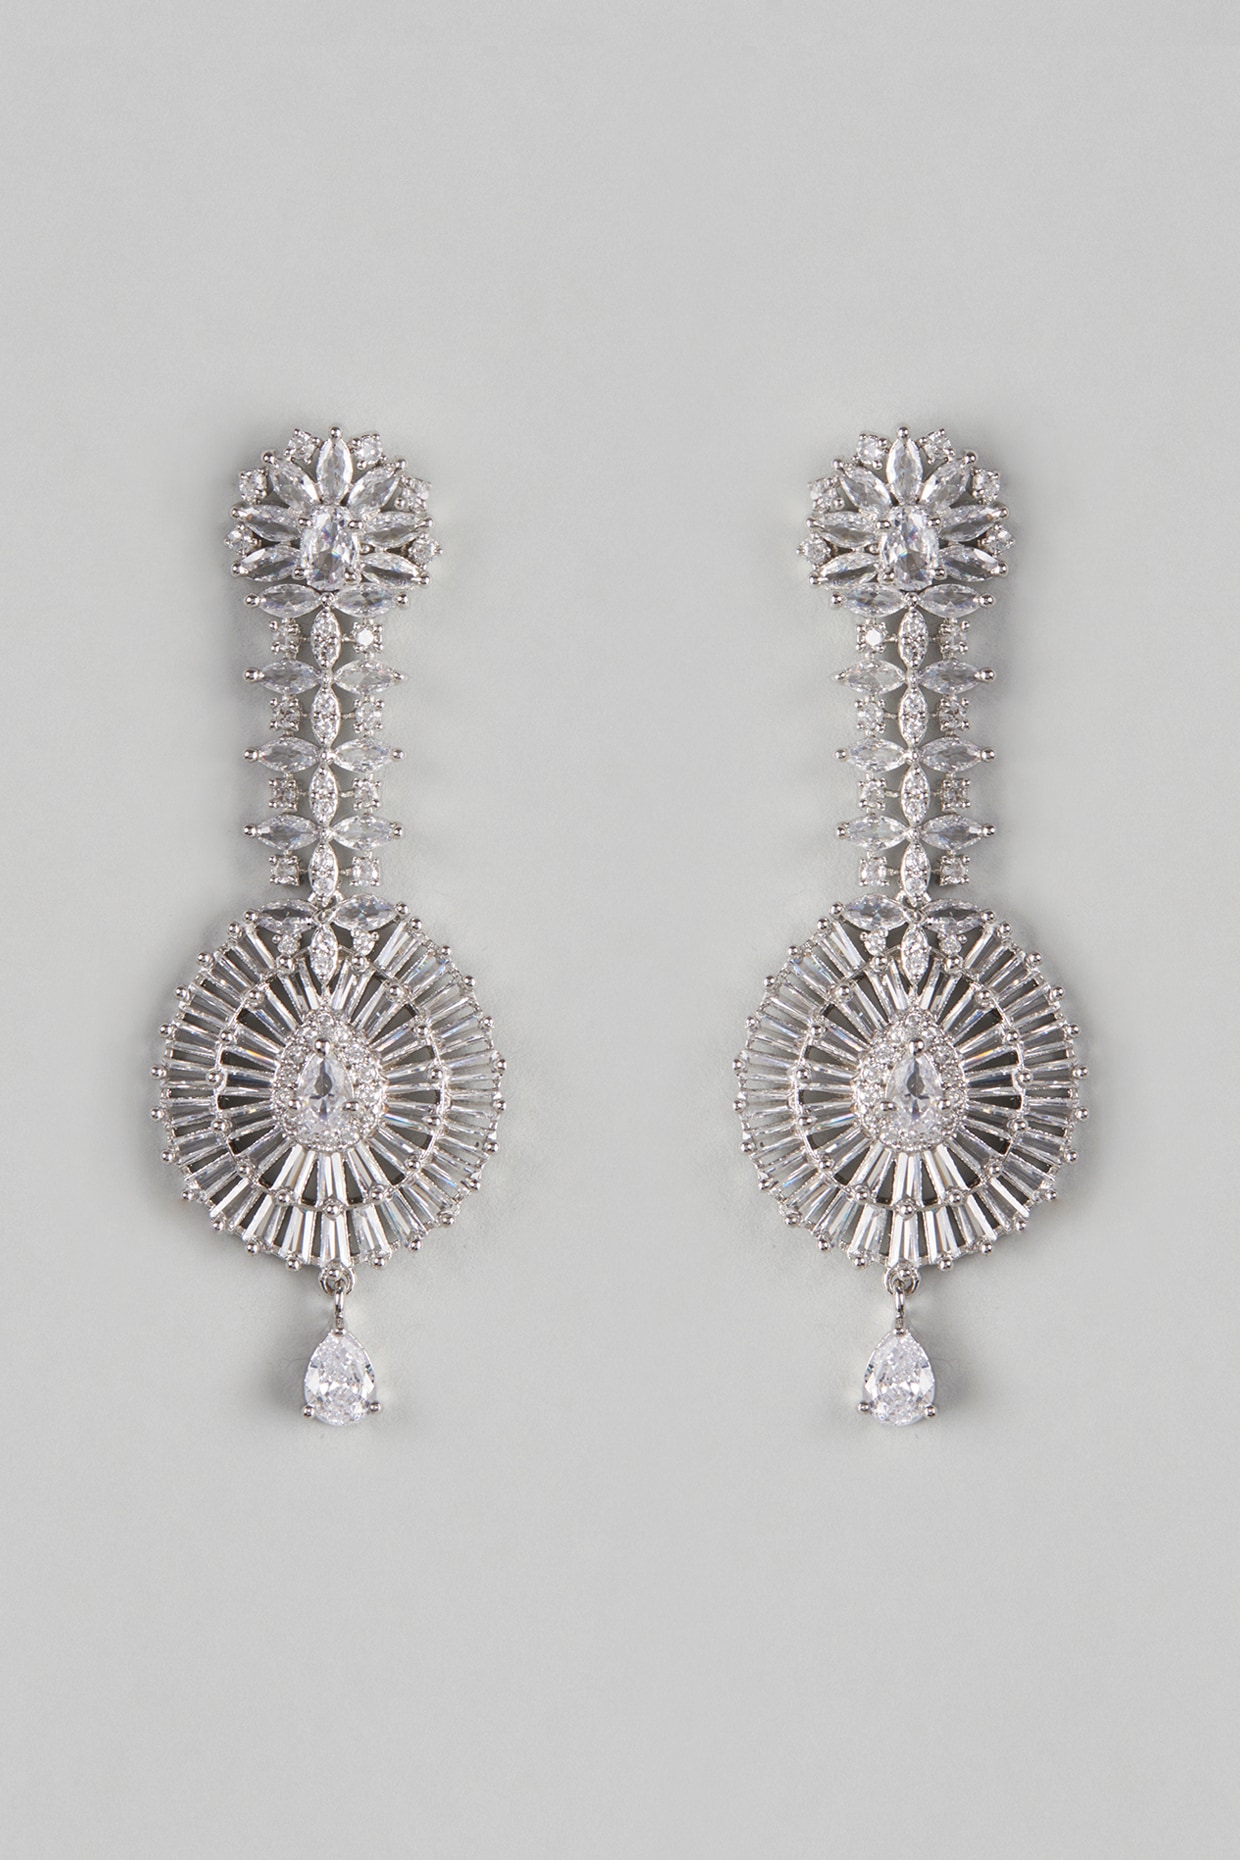 Buy Faux Diamond Earrings by DO TAARA at Ogaan Market Online Shopping Site